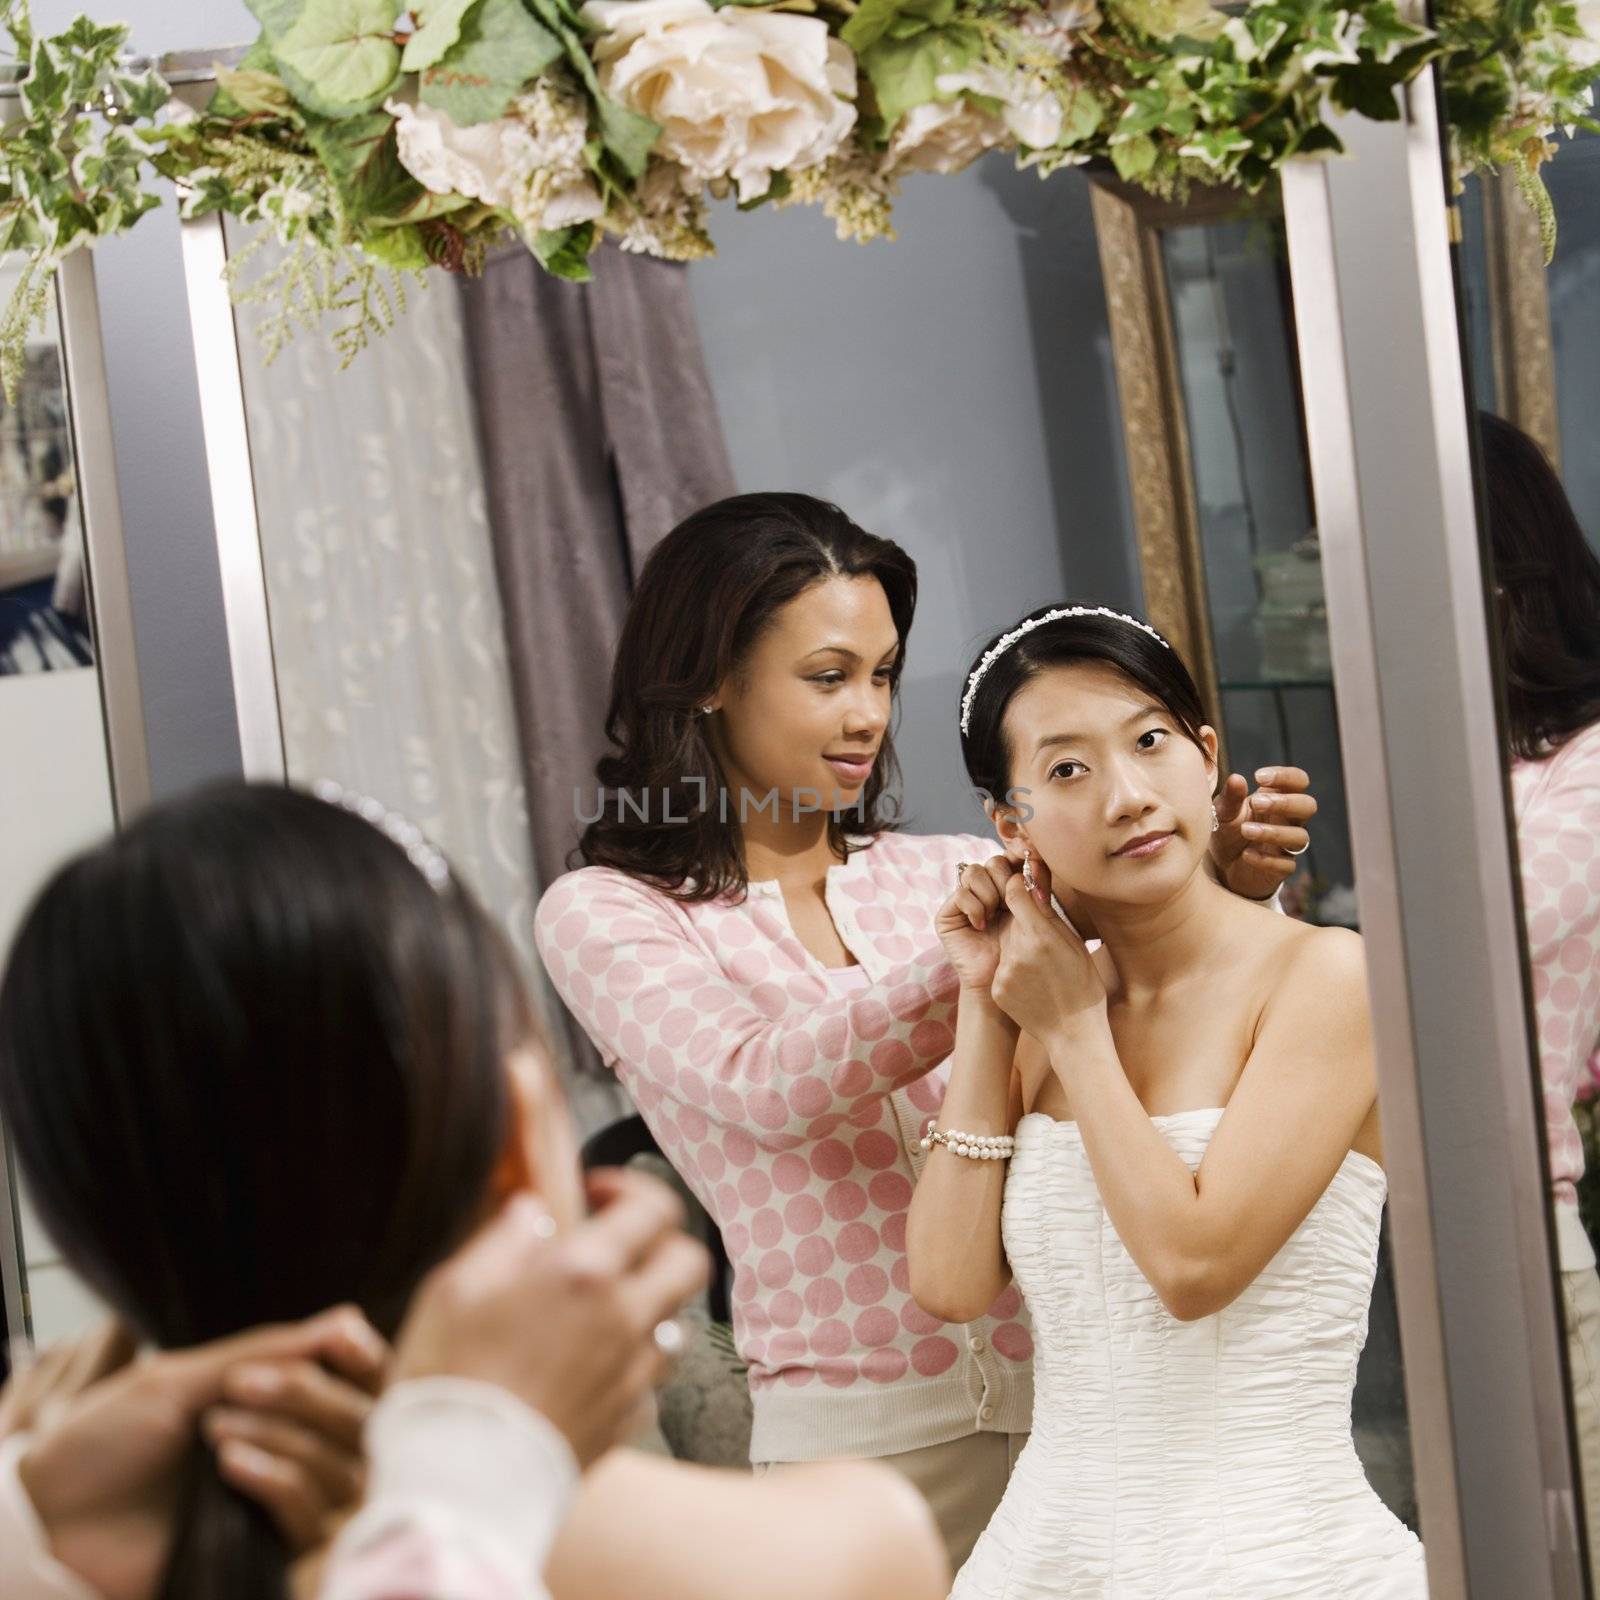 African-American woman helping Asian bride with hair.